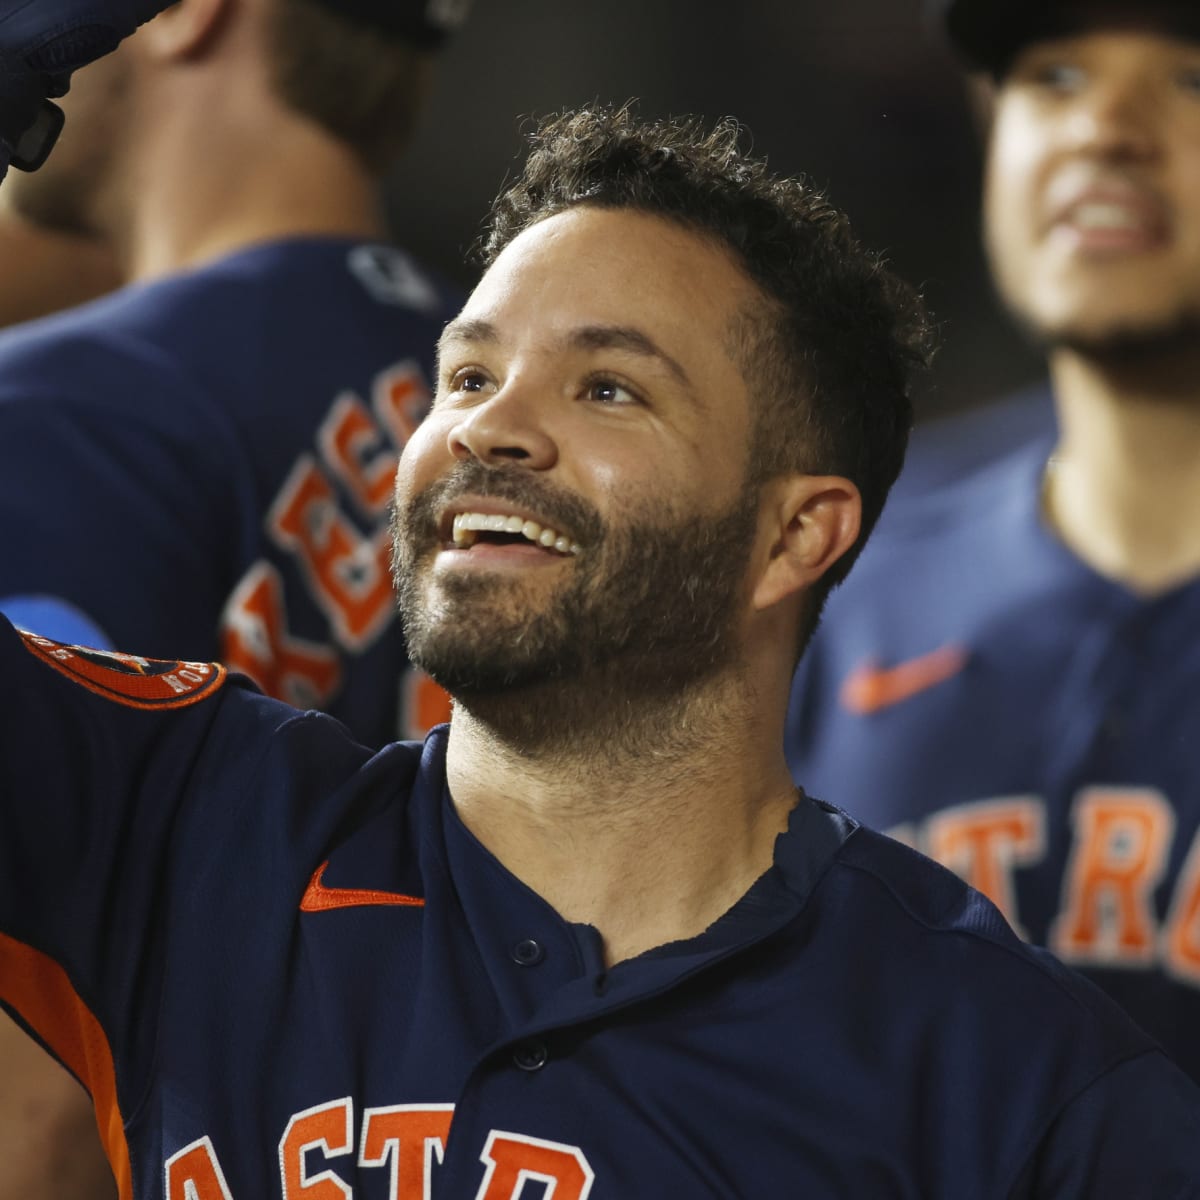 Corpus Christi Hooks - Did you know? Jose Altuve played for Corpus Christi  in 2011 before making his major league debut later that year. He produced  nine doubles, three triples and five